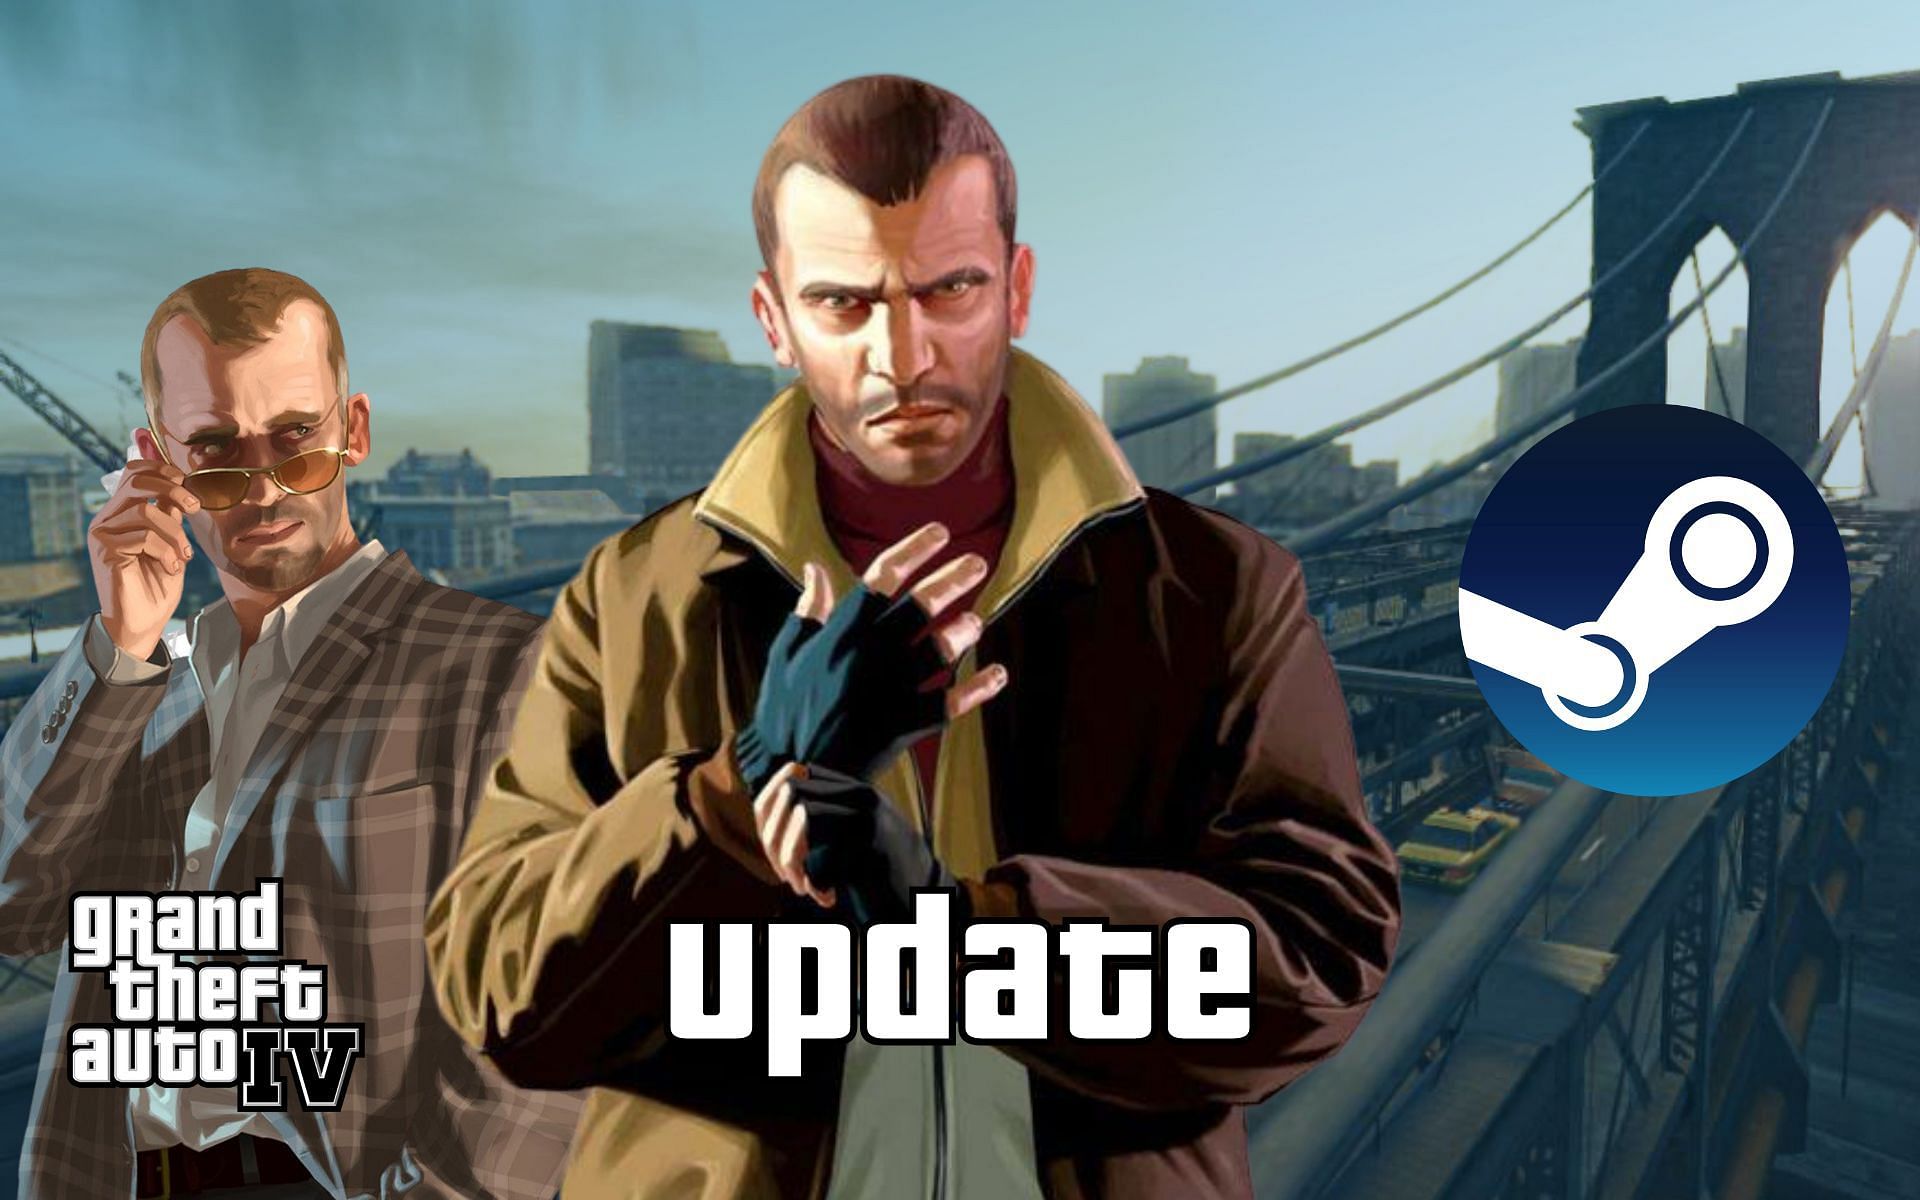 Grand Theft Auto IV returns to Steam with an upgrade for existing owners